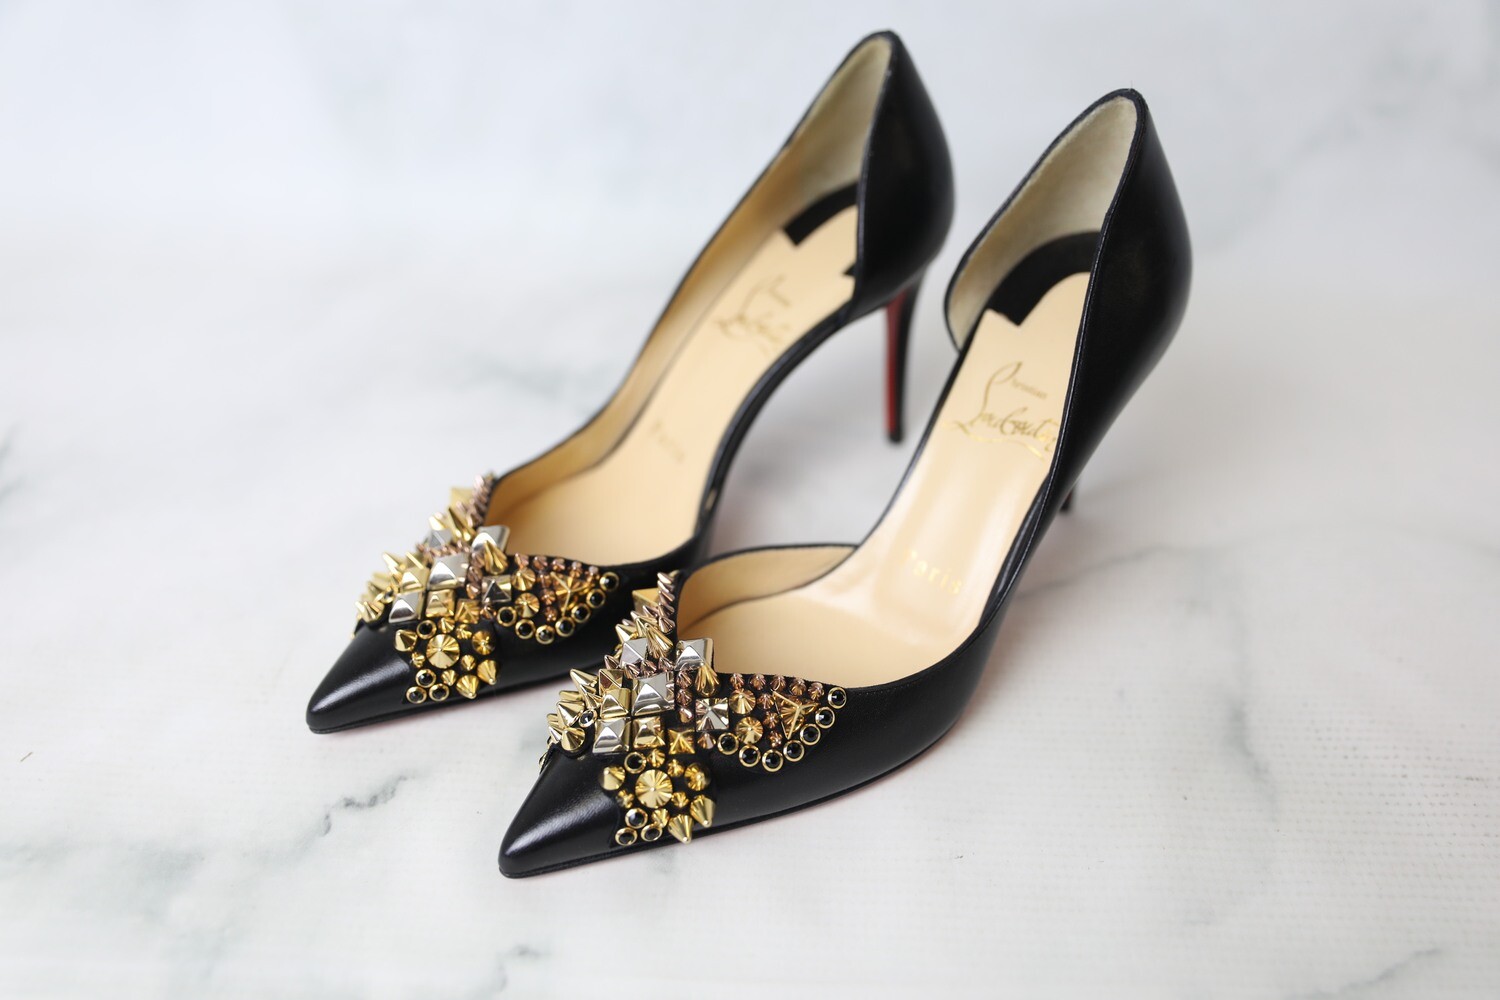 Christian Louboutin Shoes Heels Black Farfaclou D'orsay 85mm Nude Gold  Spike A279 Pumps, New in Box WA001